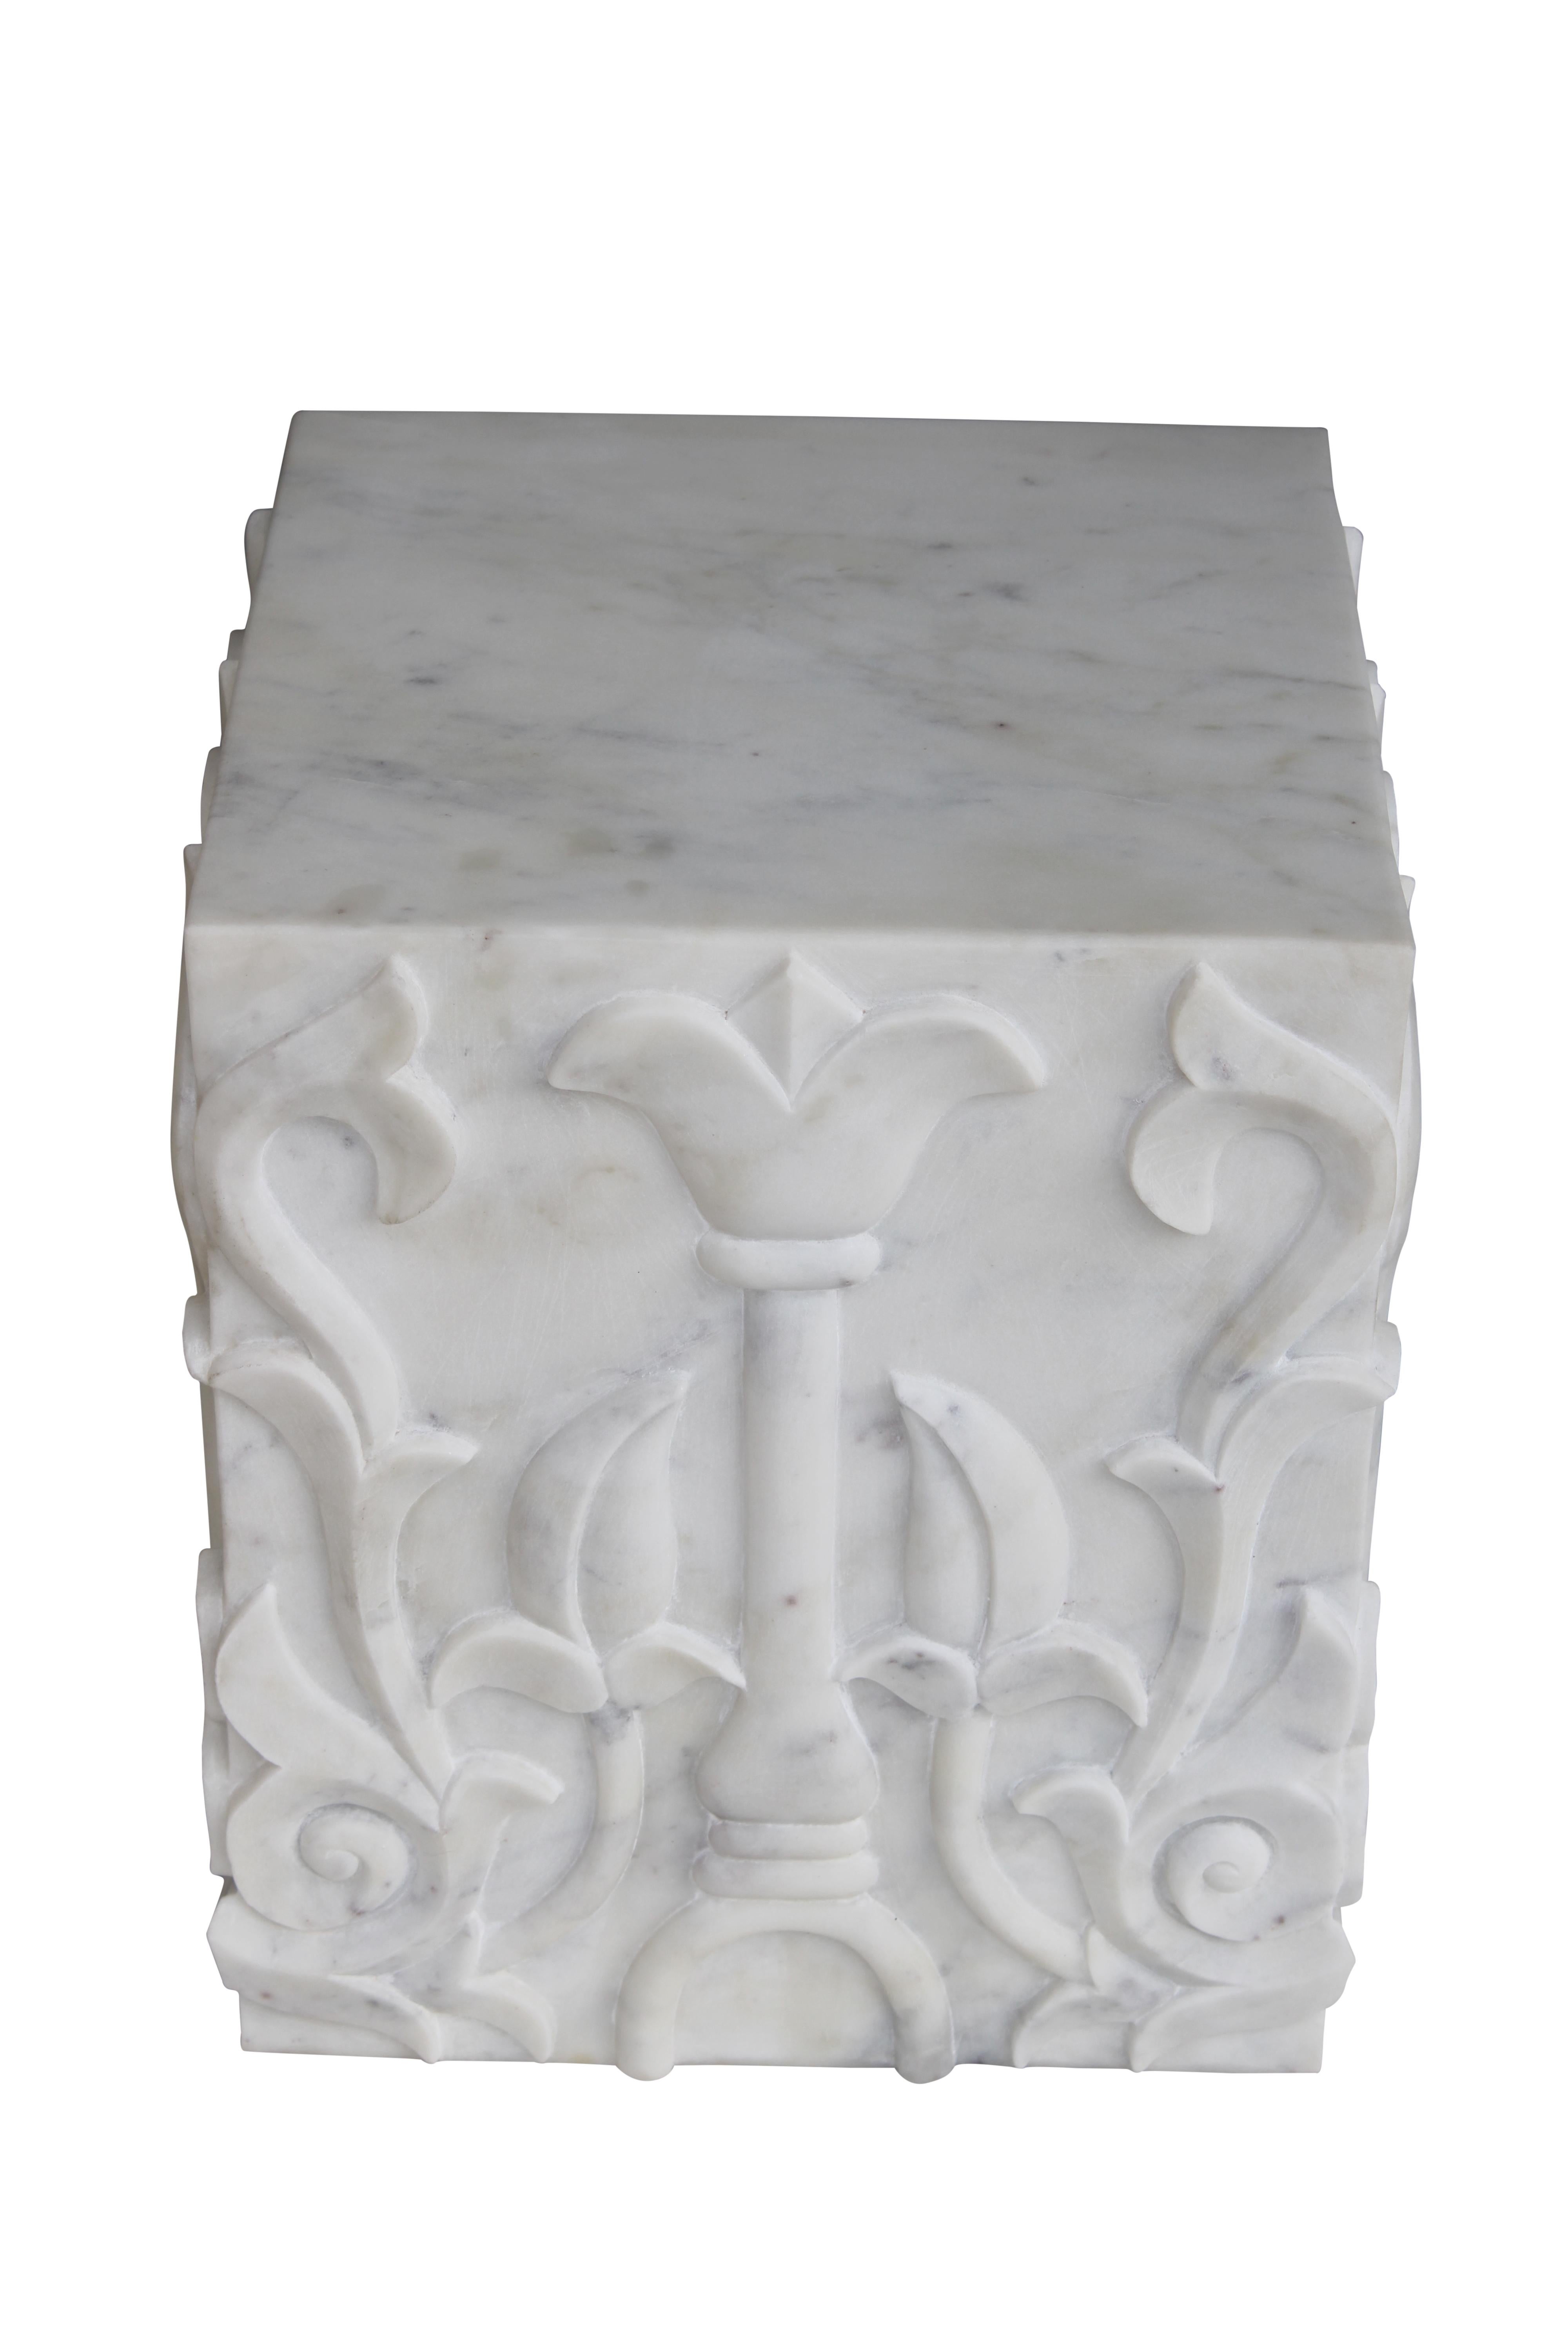 Hand-Carved Lotus carved Pedestal in White Marble Handcrafted in India by Stephanie Odegard For Sale